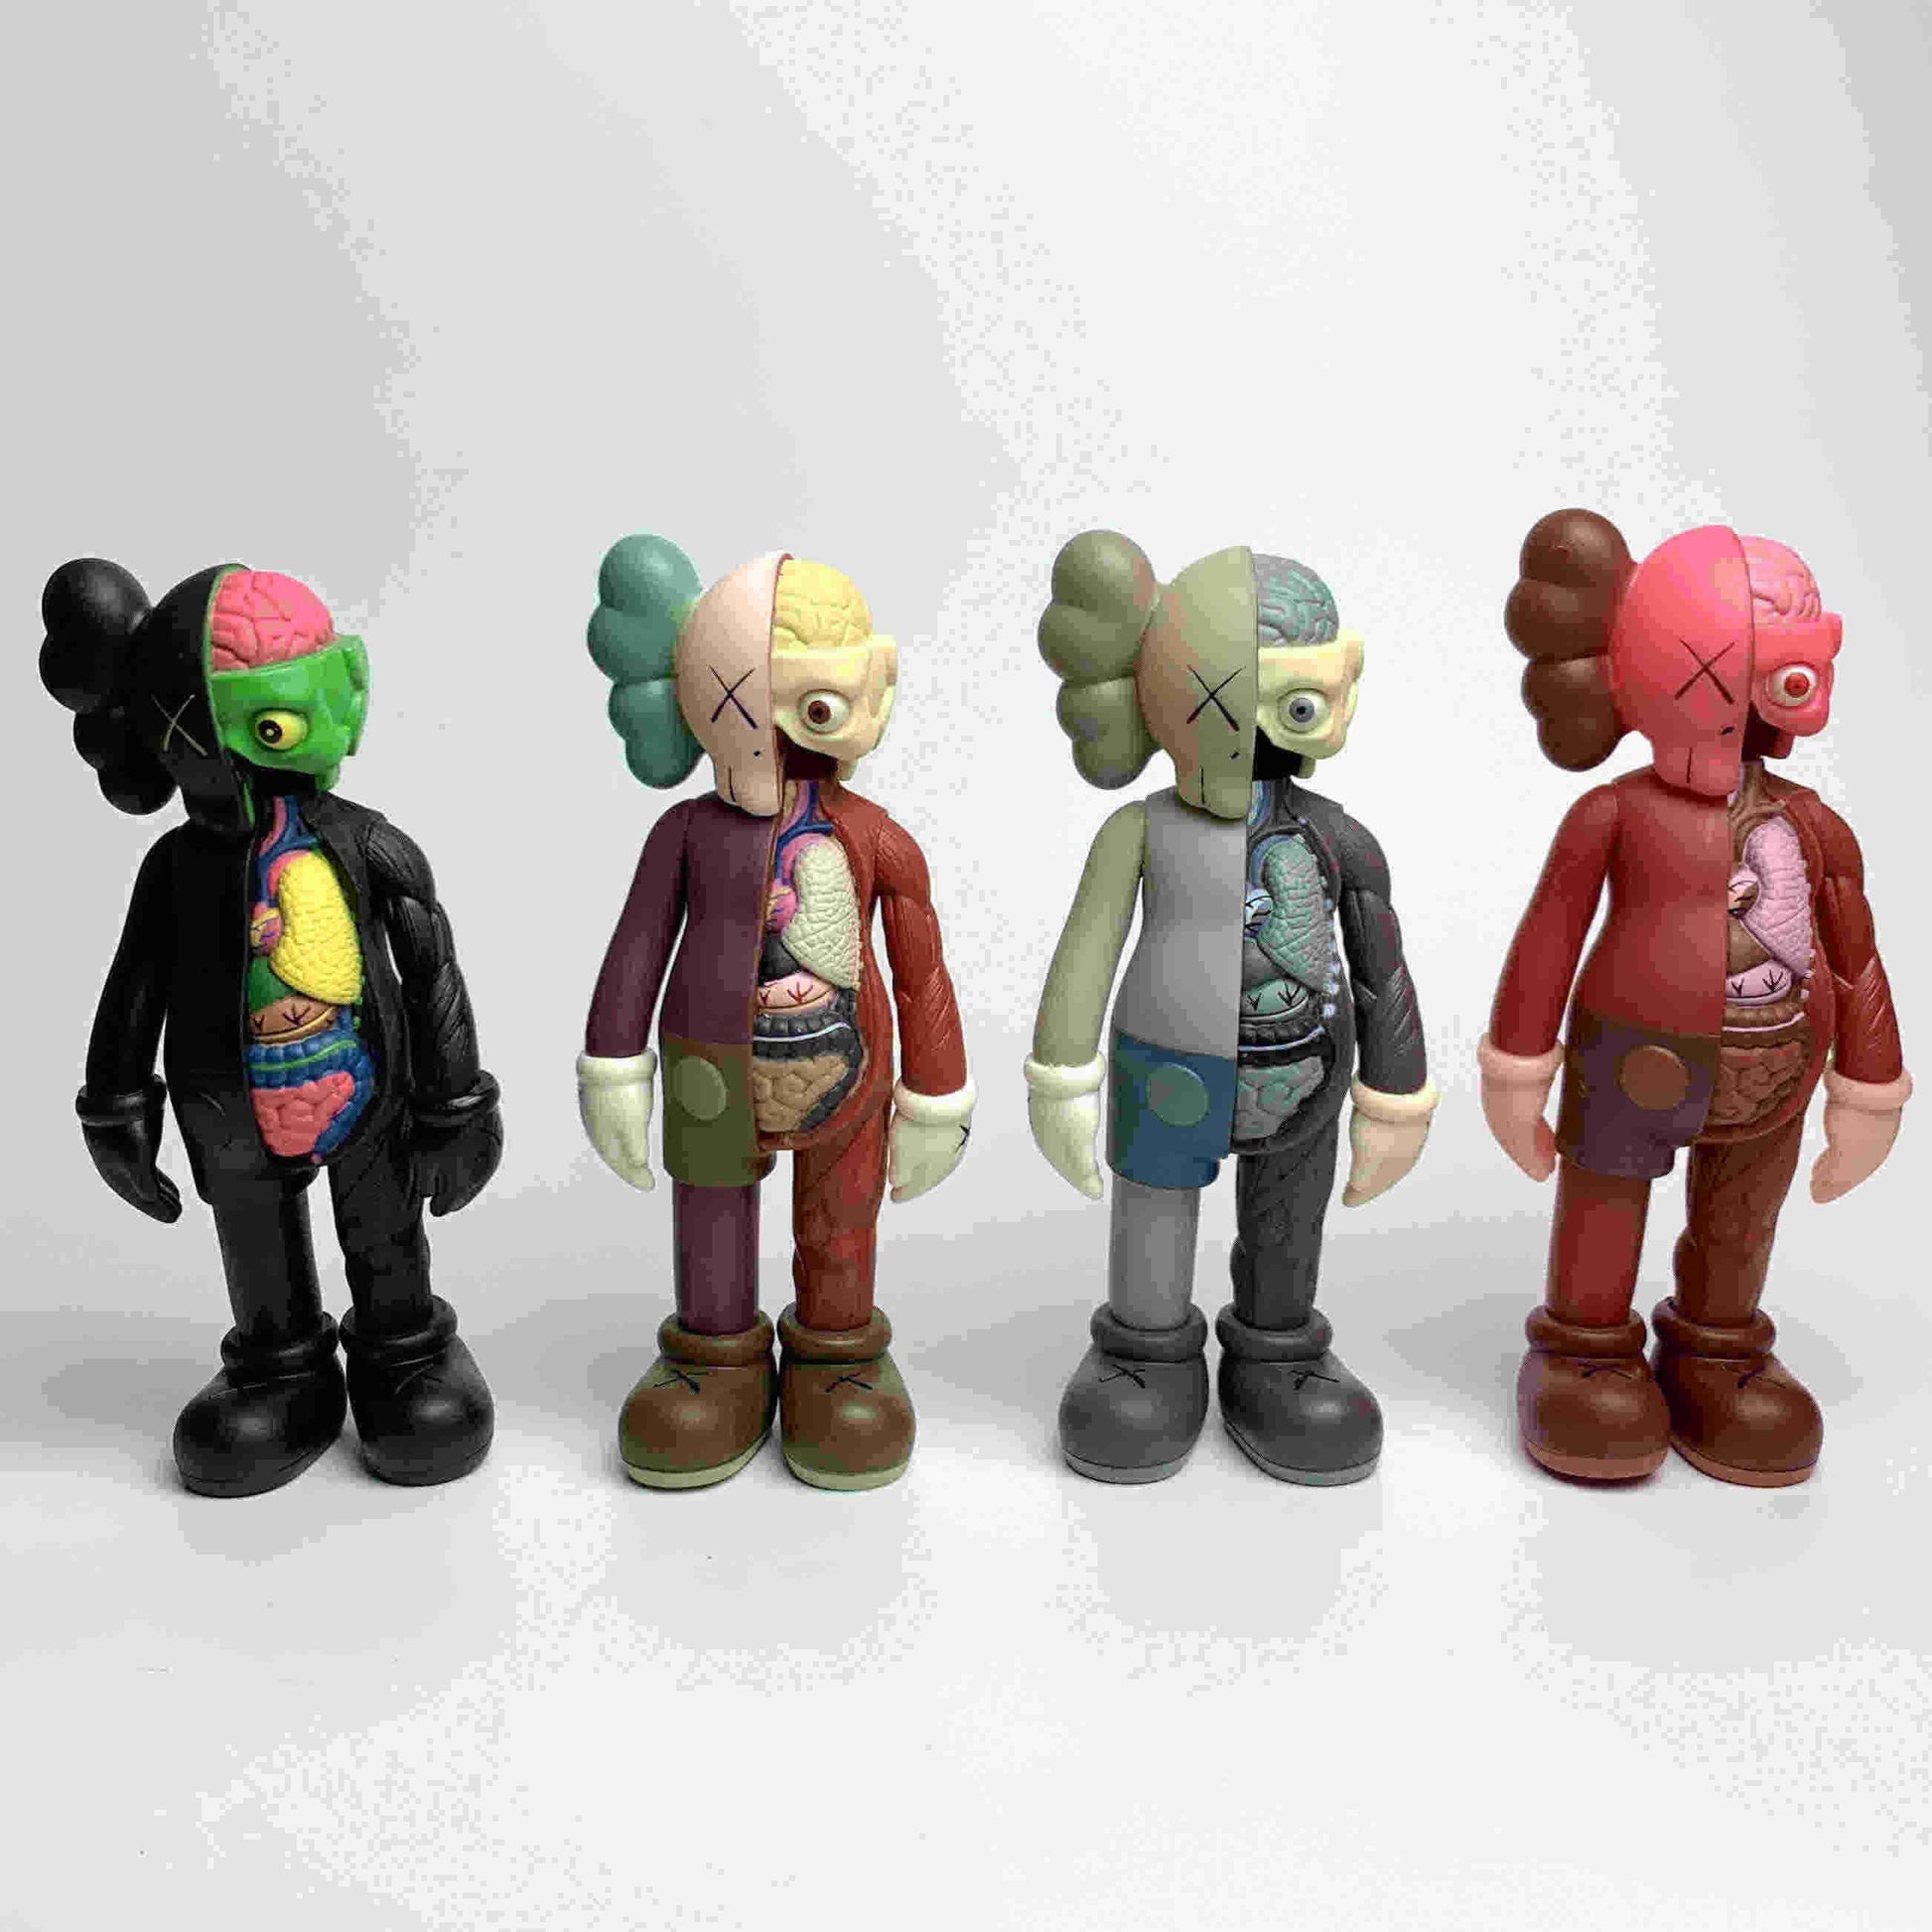 16 Inch kaws action figure Dissected Companion